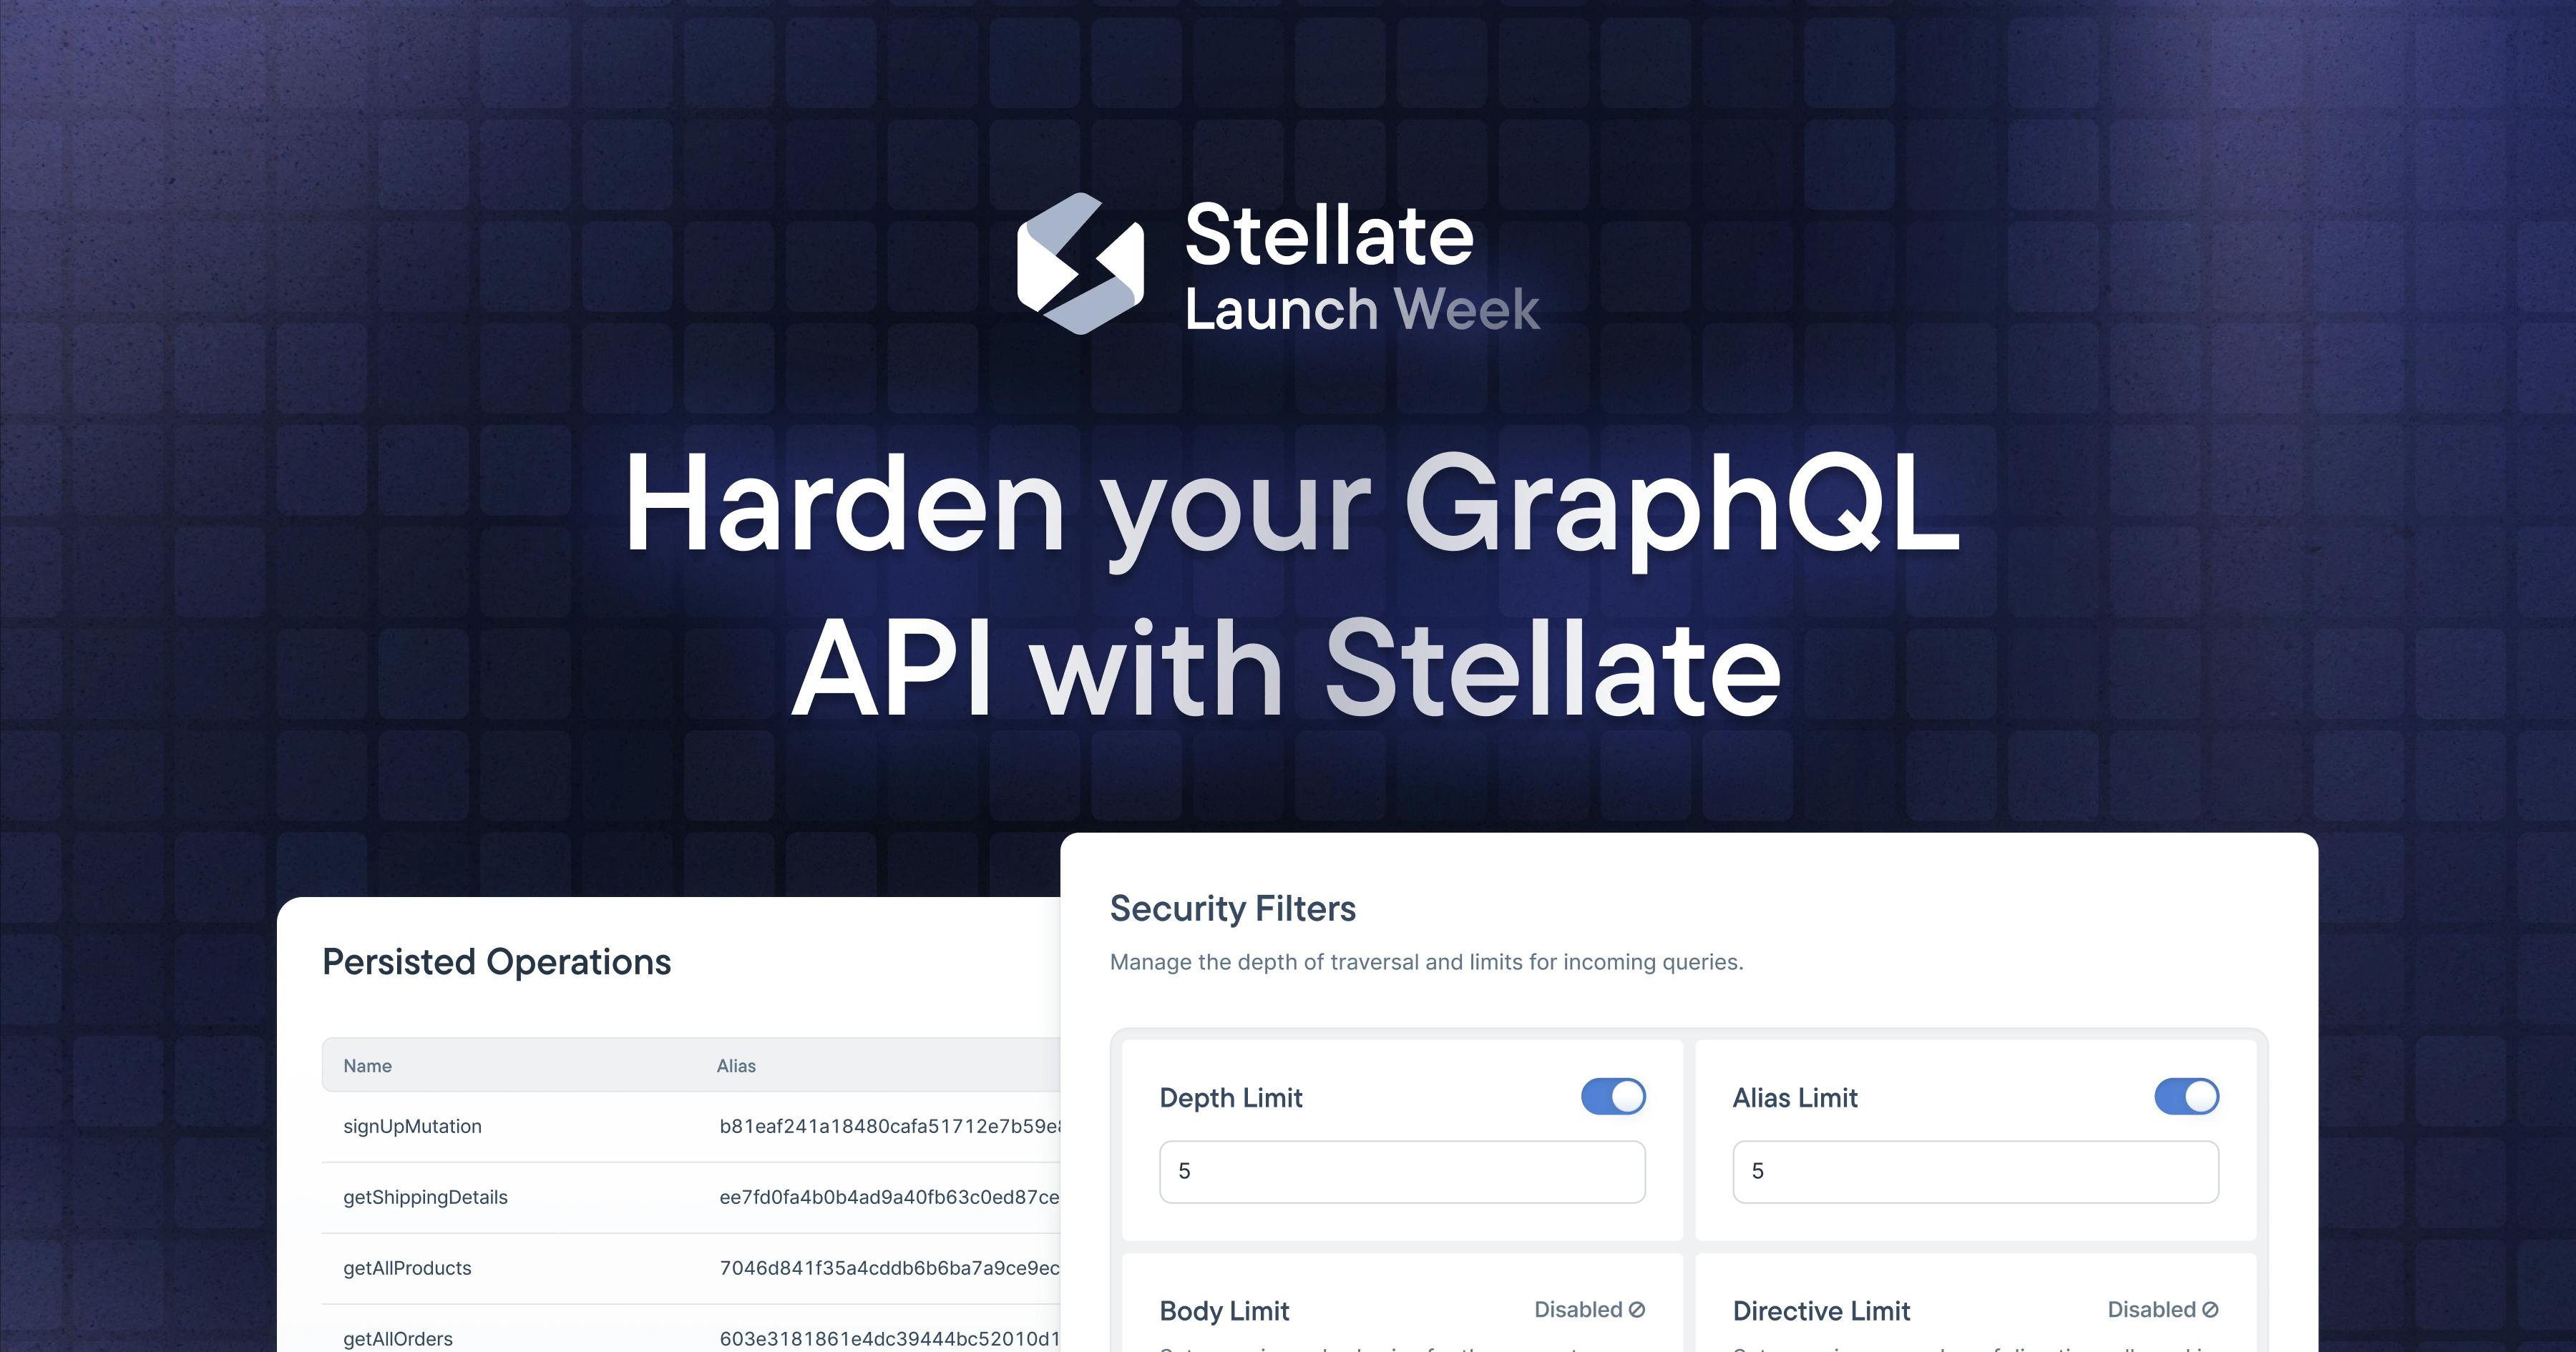 Launch Week: Harden your GraphQL API with Stellate